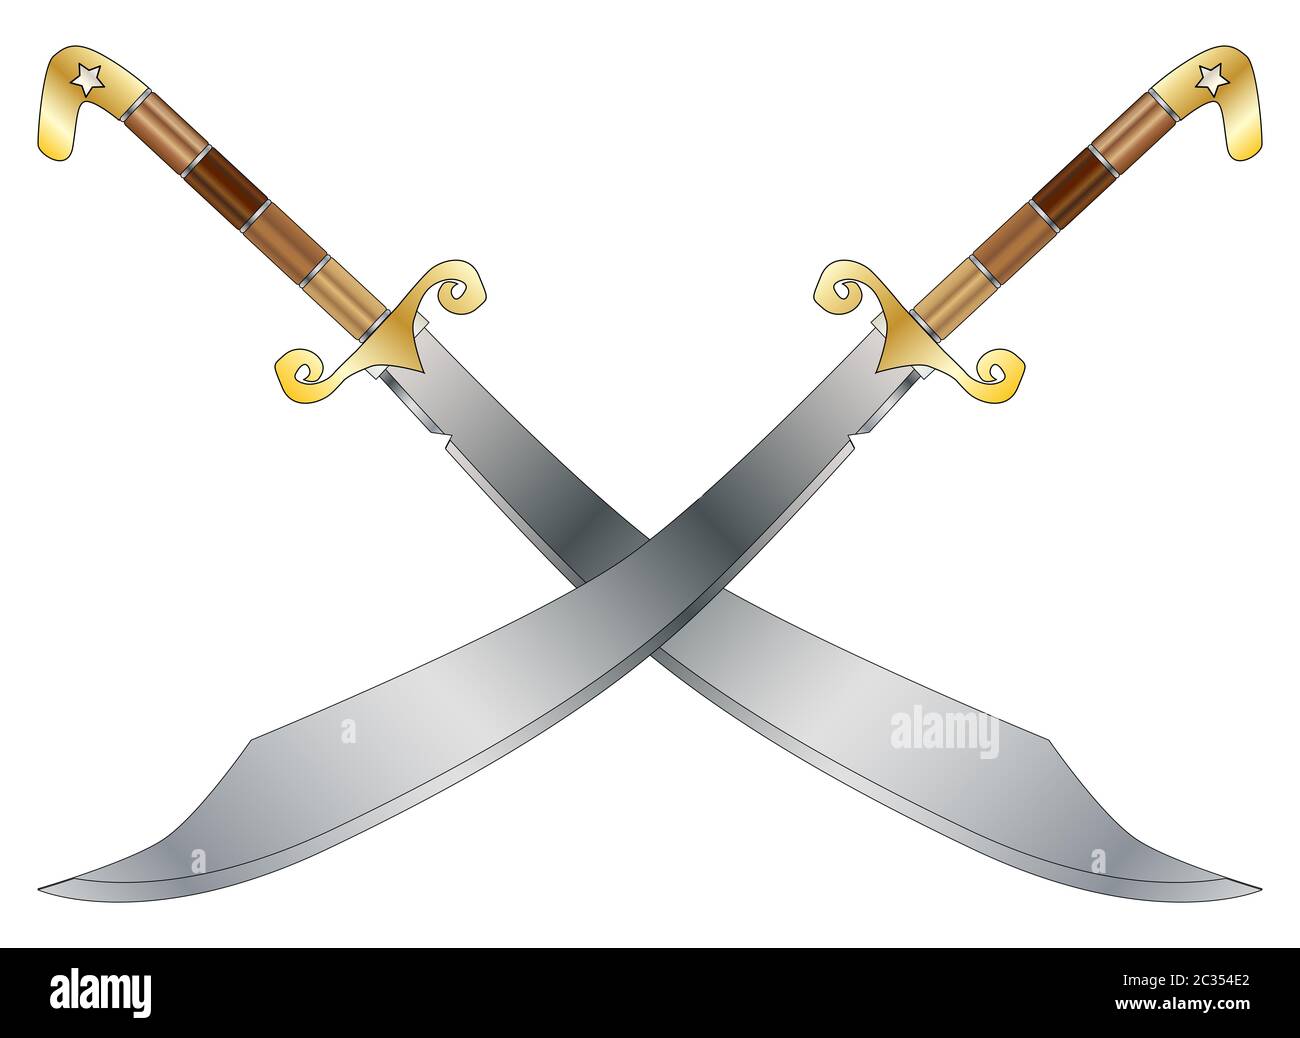 Two crossed scimitar sword as used by arabian warriors in the crusades and other wars isolated on white Stock Photo